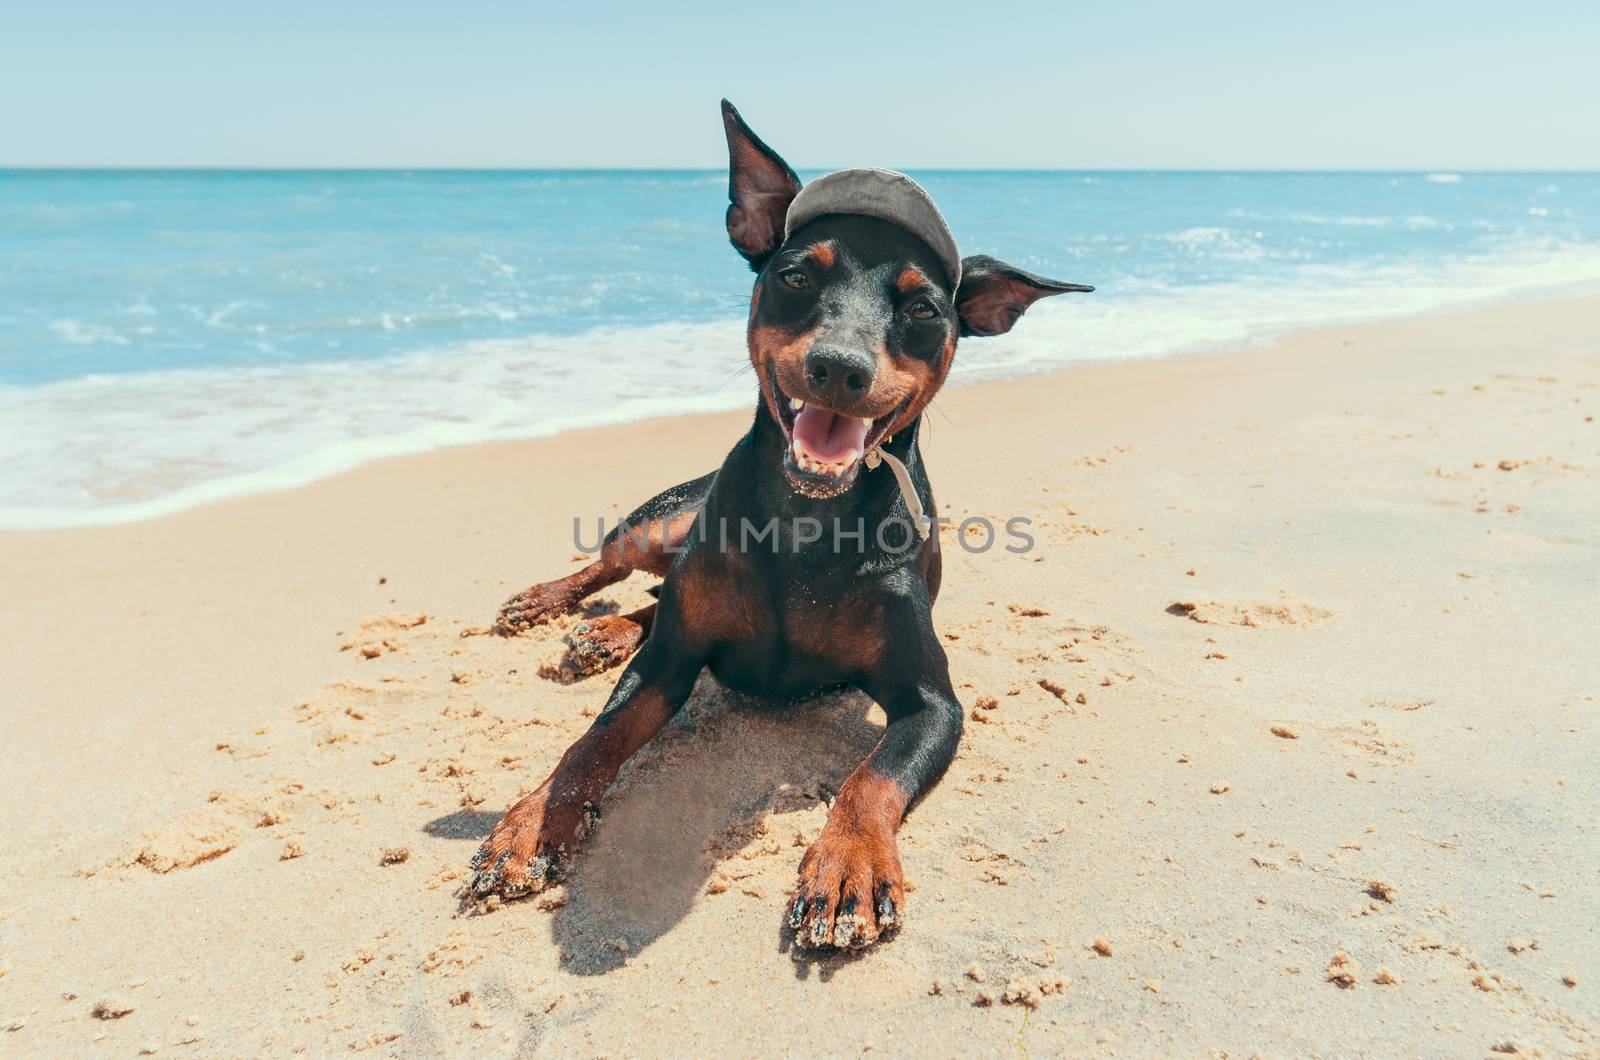 miniature pinscher puppy on the beach by the blue lagoon by Gera8th